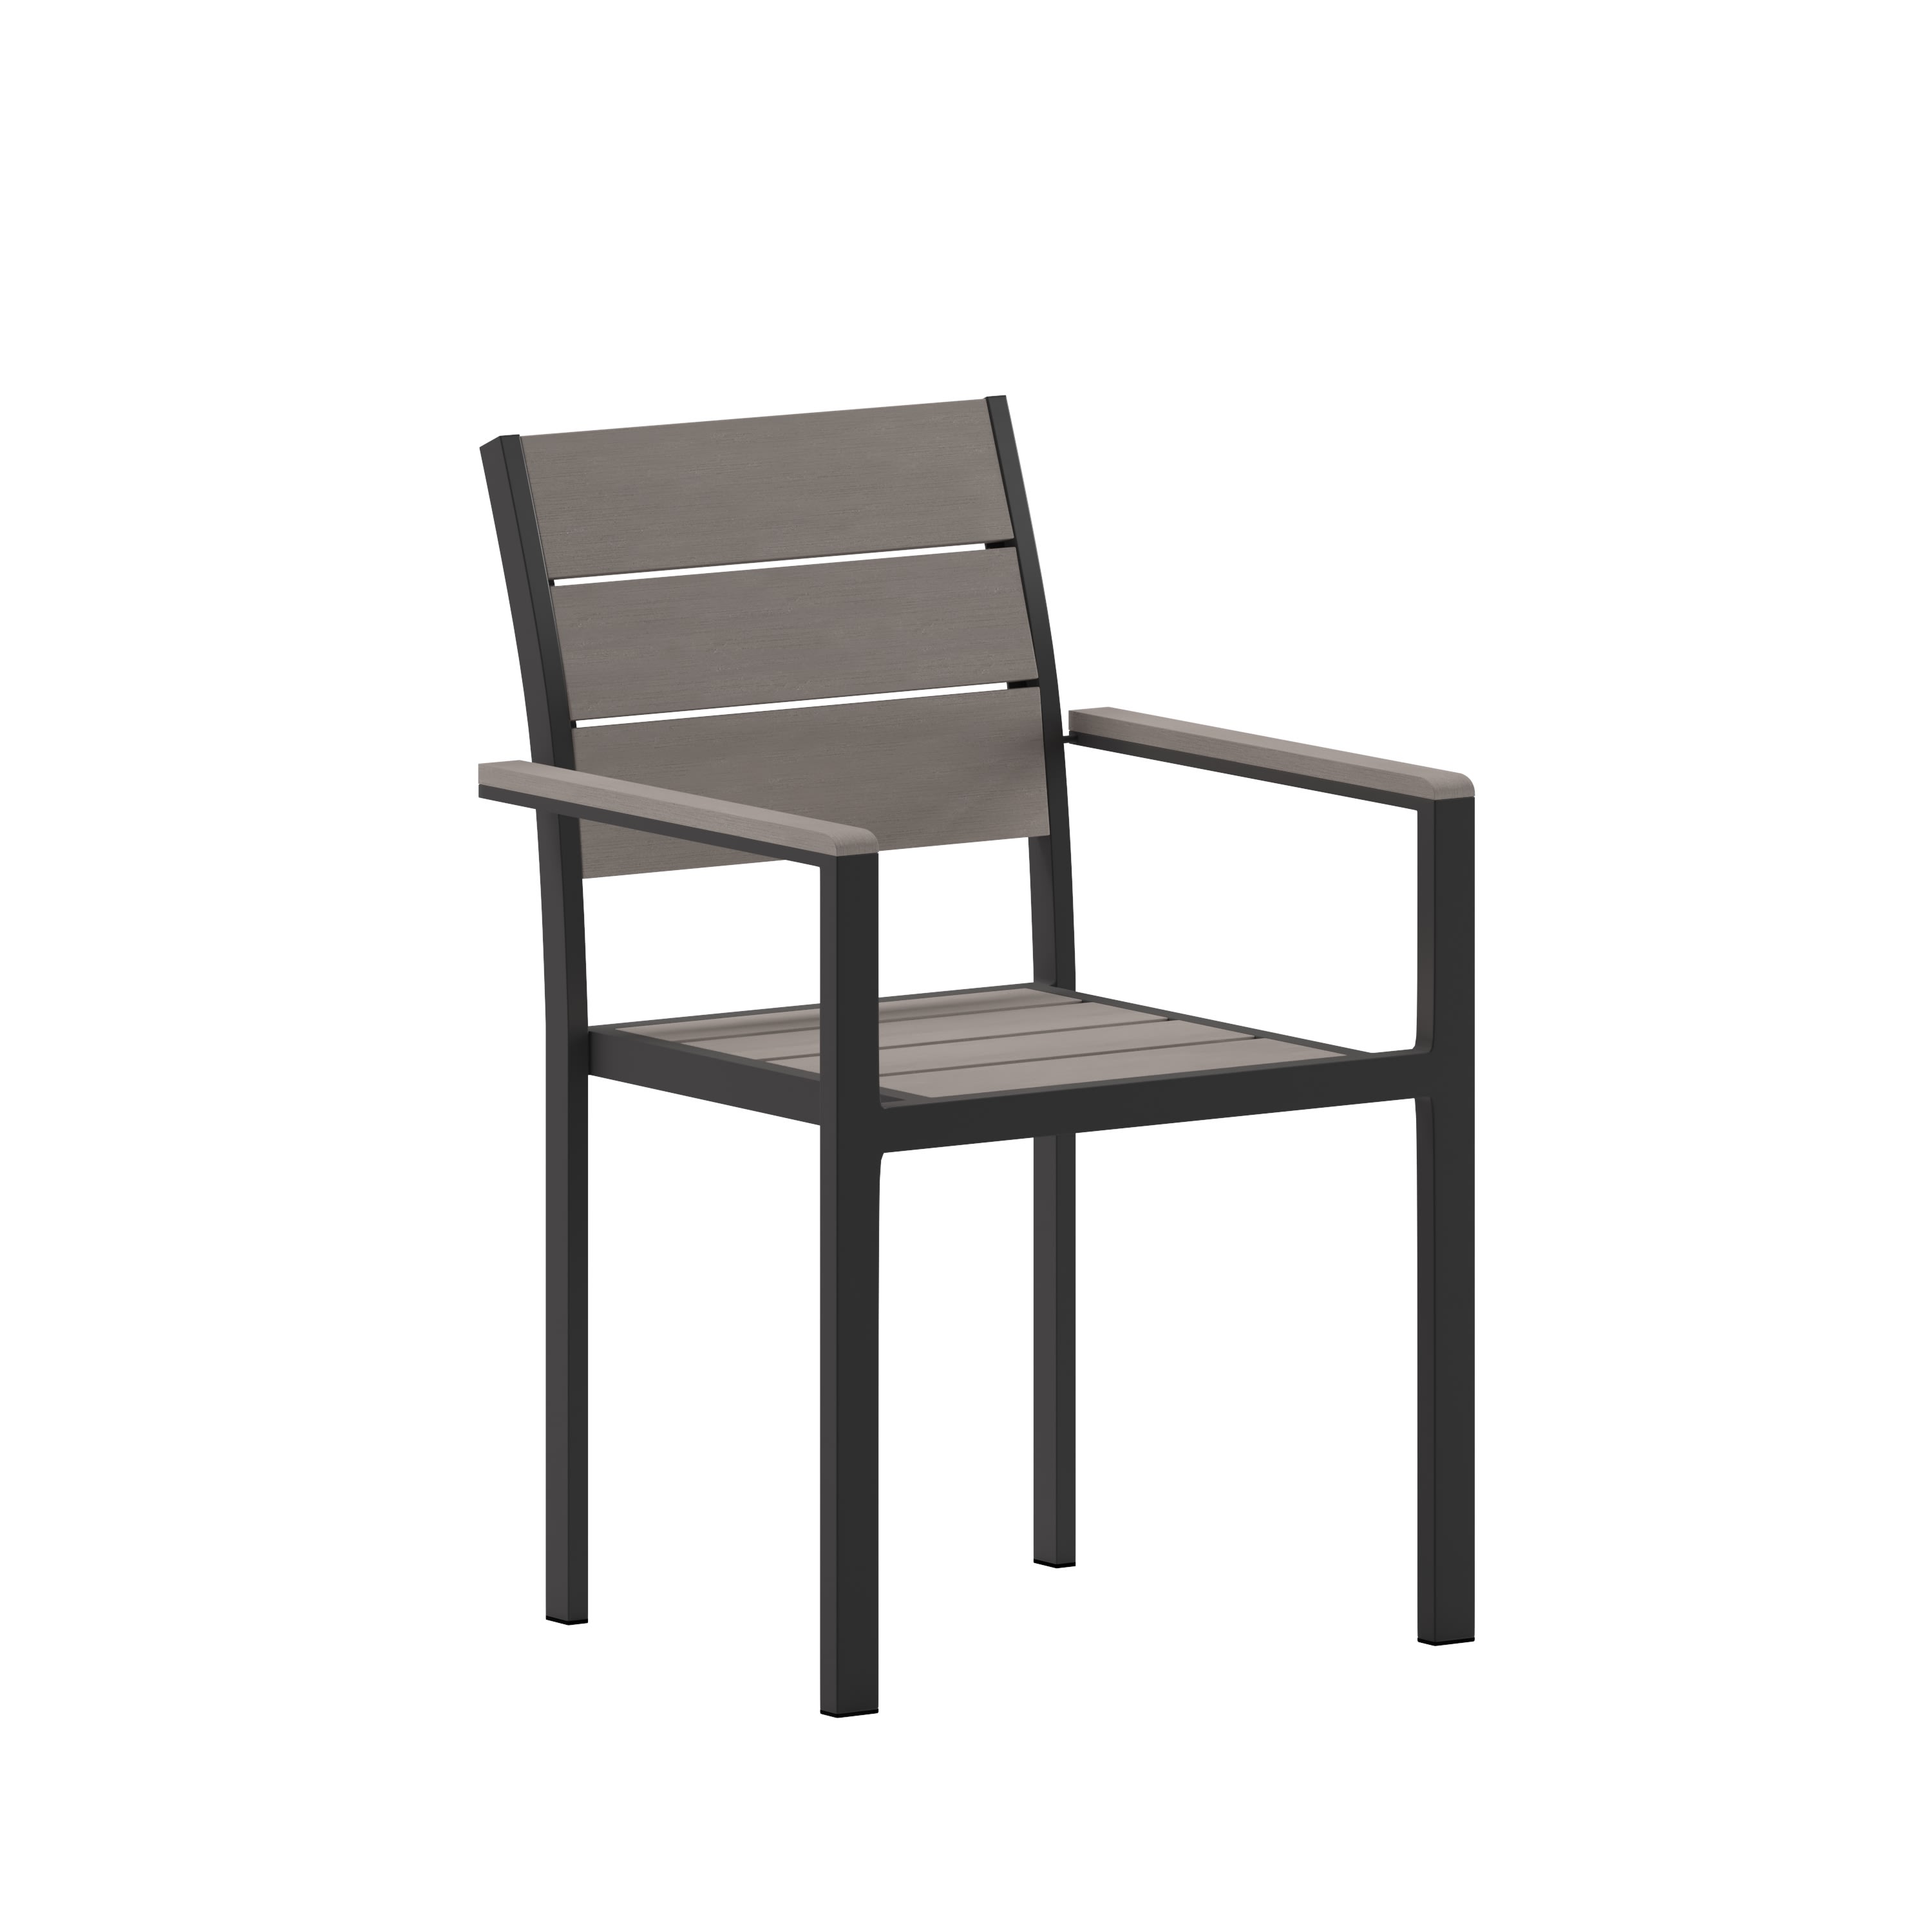 Patio Chair with Arms SB-CA108-WA- – Stack Chairs 4 Less